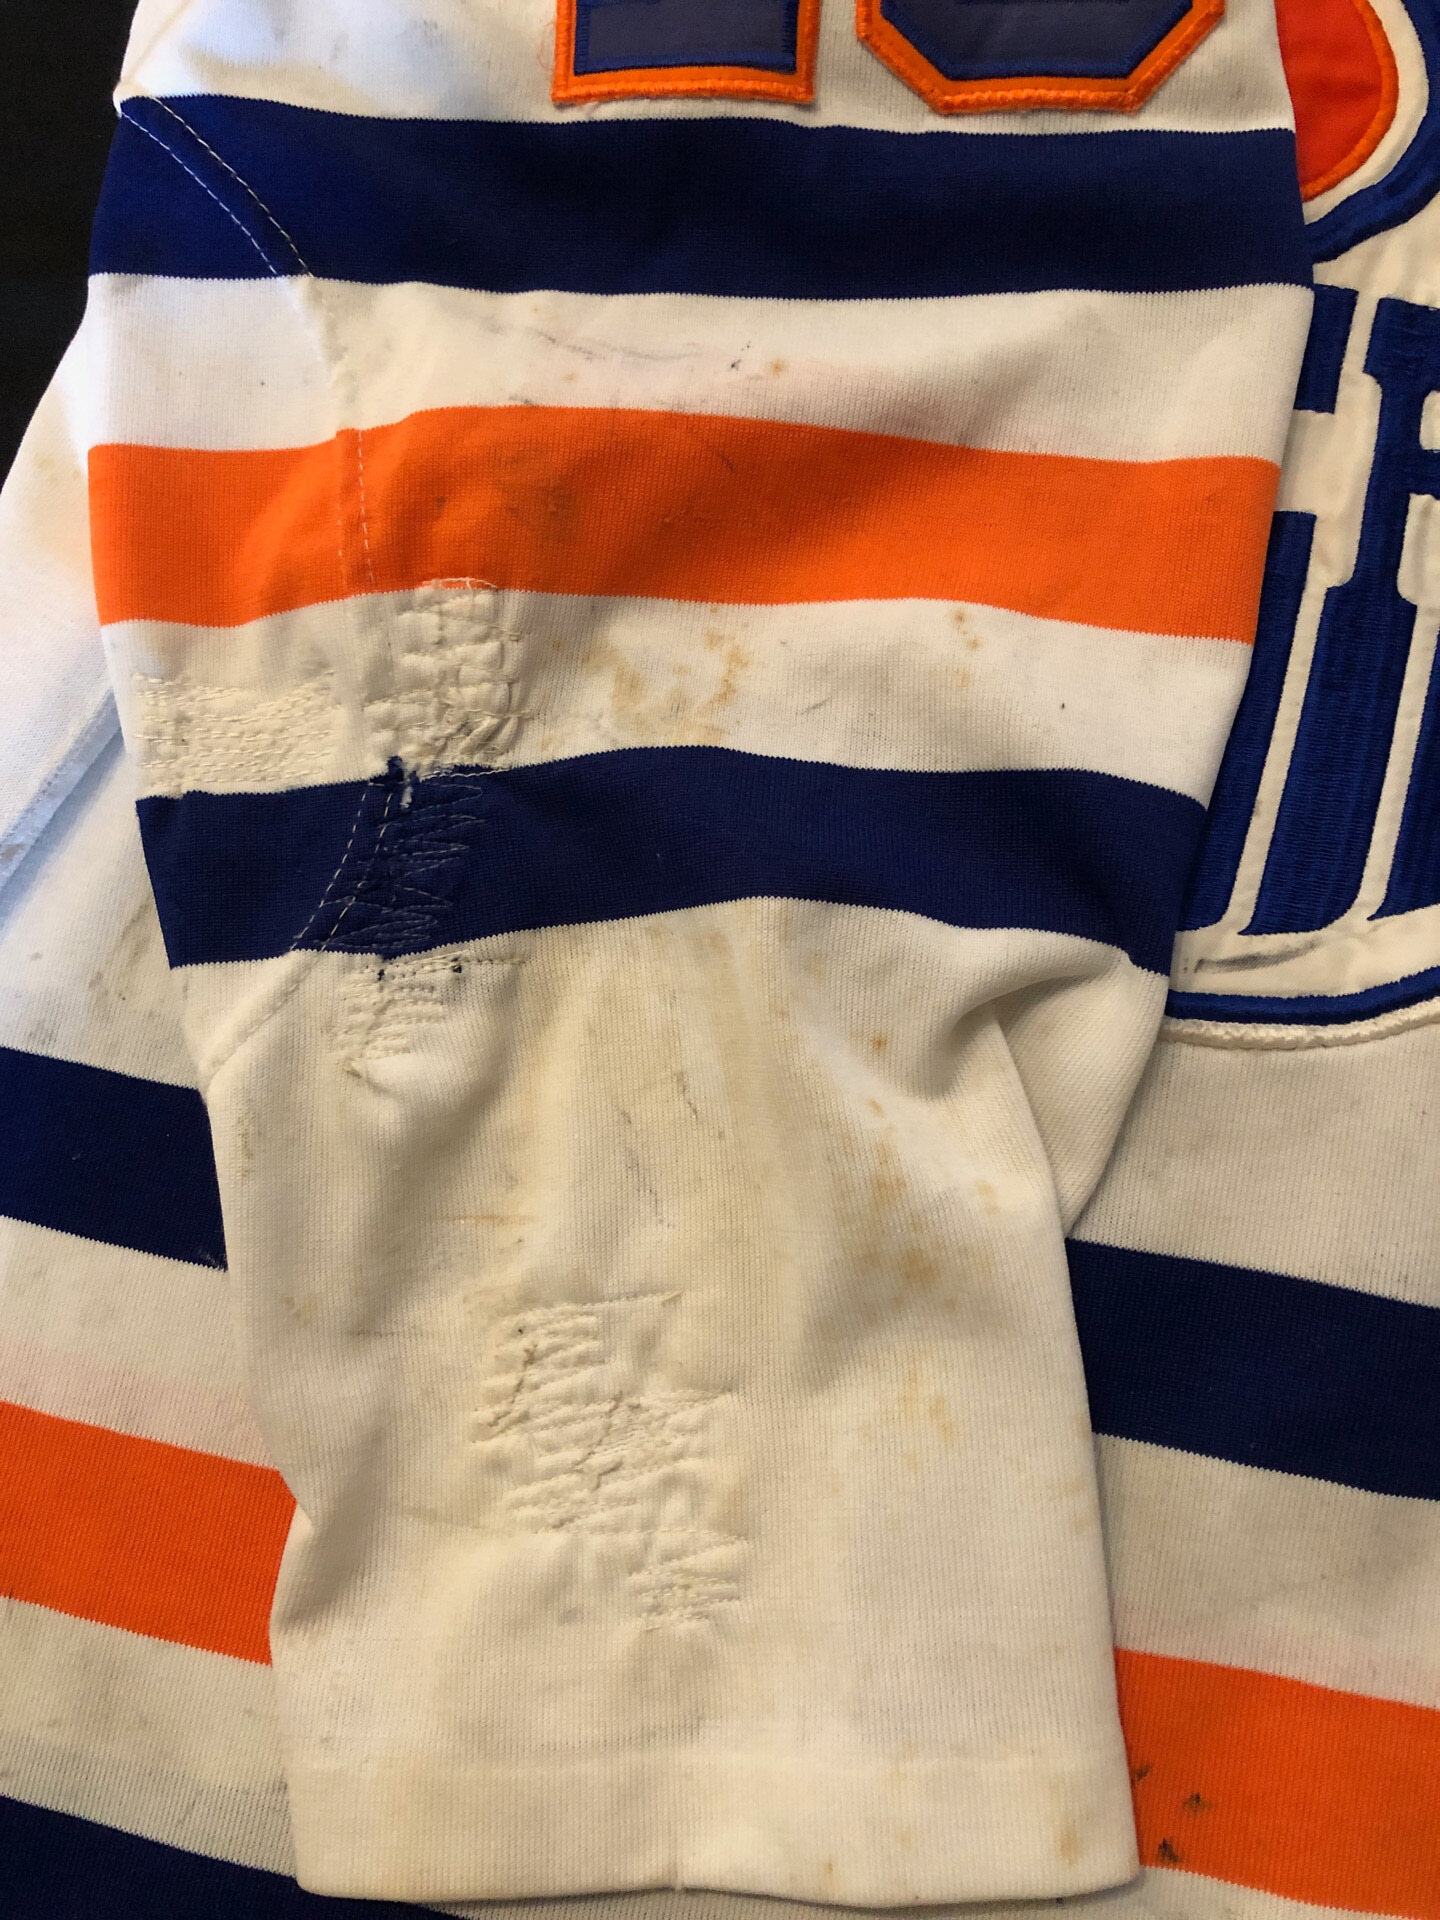 Oilers To Wear “Retro” Blue Jerseys Four Times In 2018-19 - The